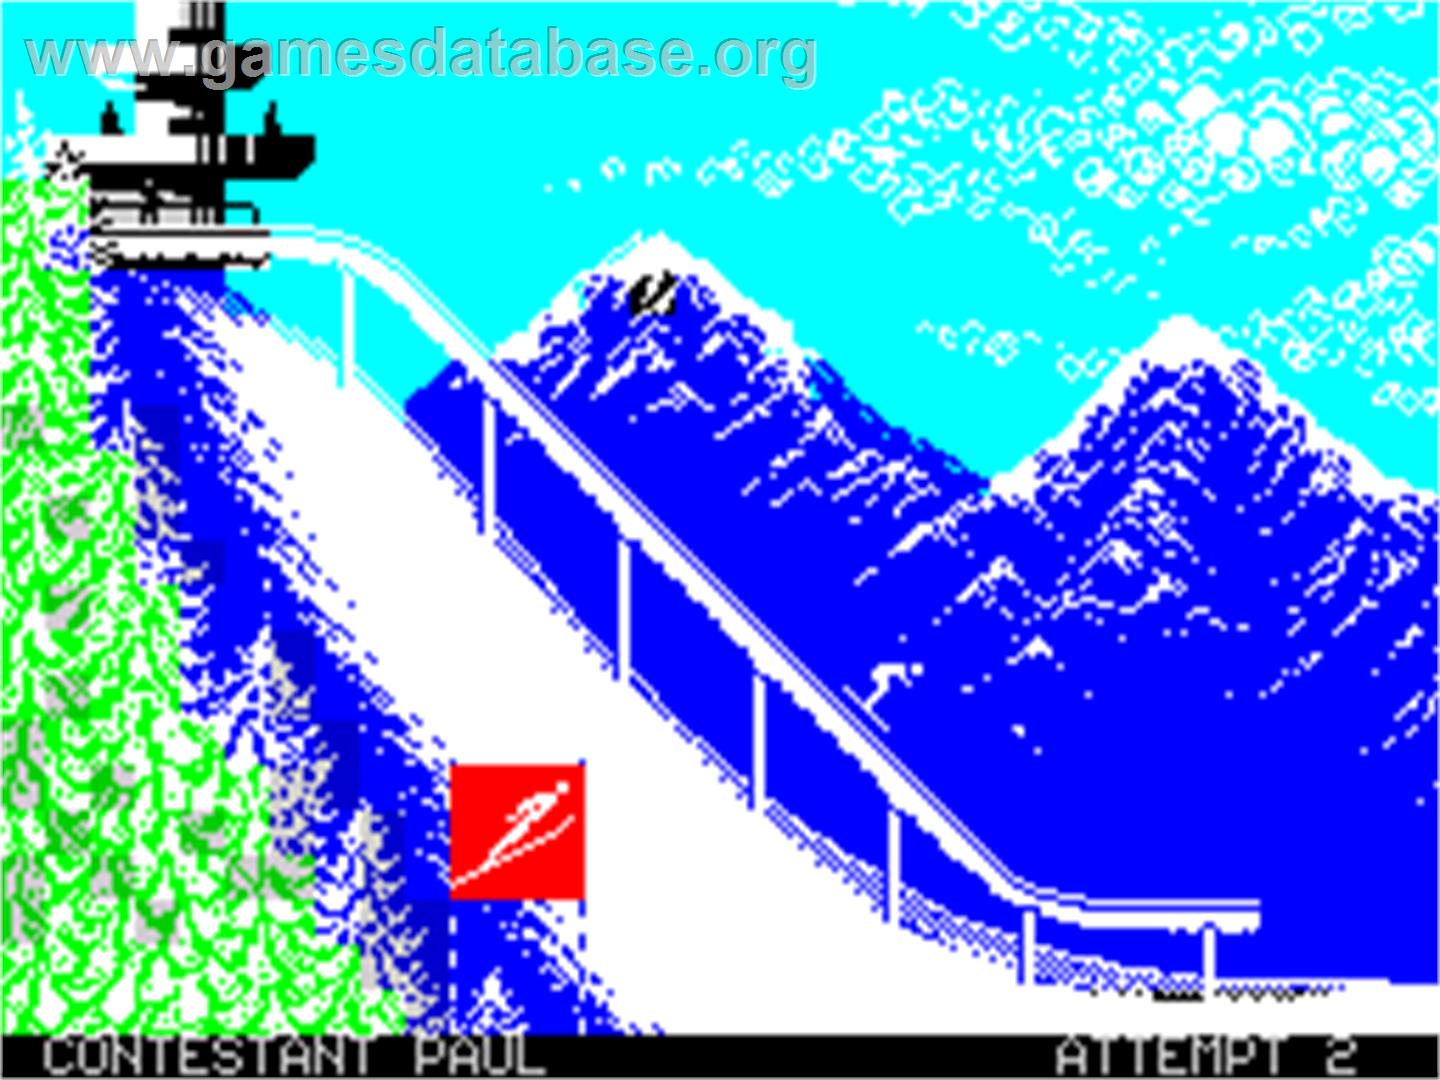 Solid Gold - Sinclair ZX Spectrum - Artwork - In Game